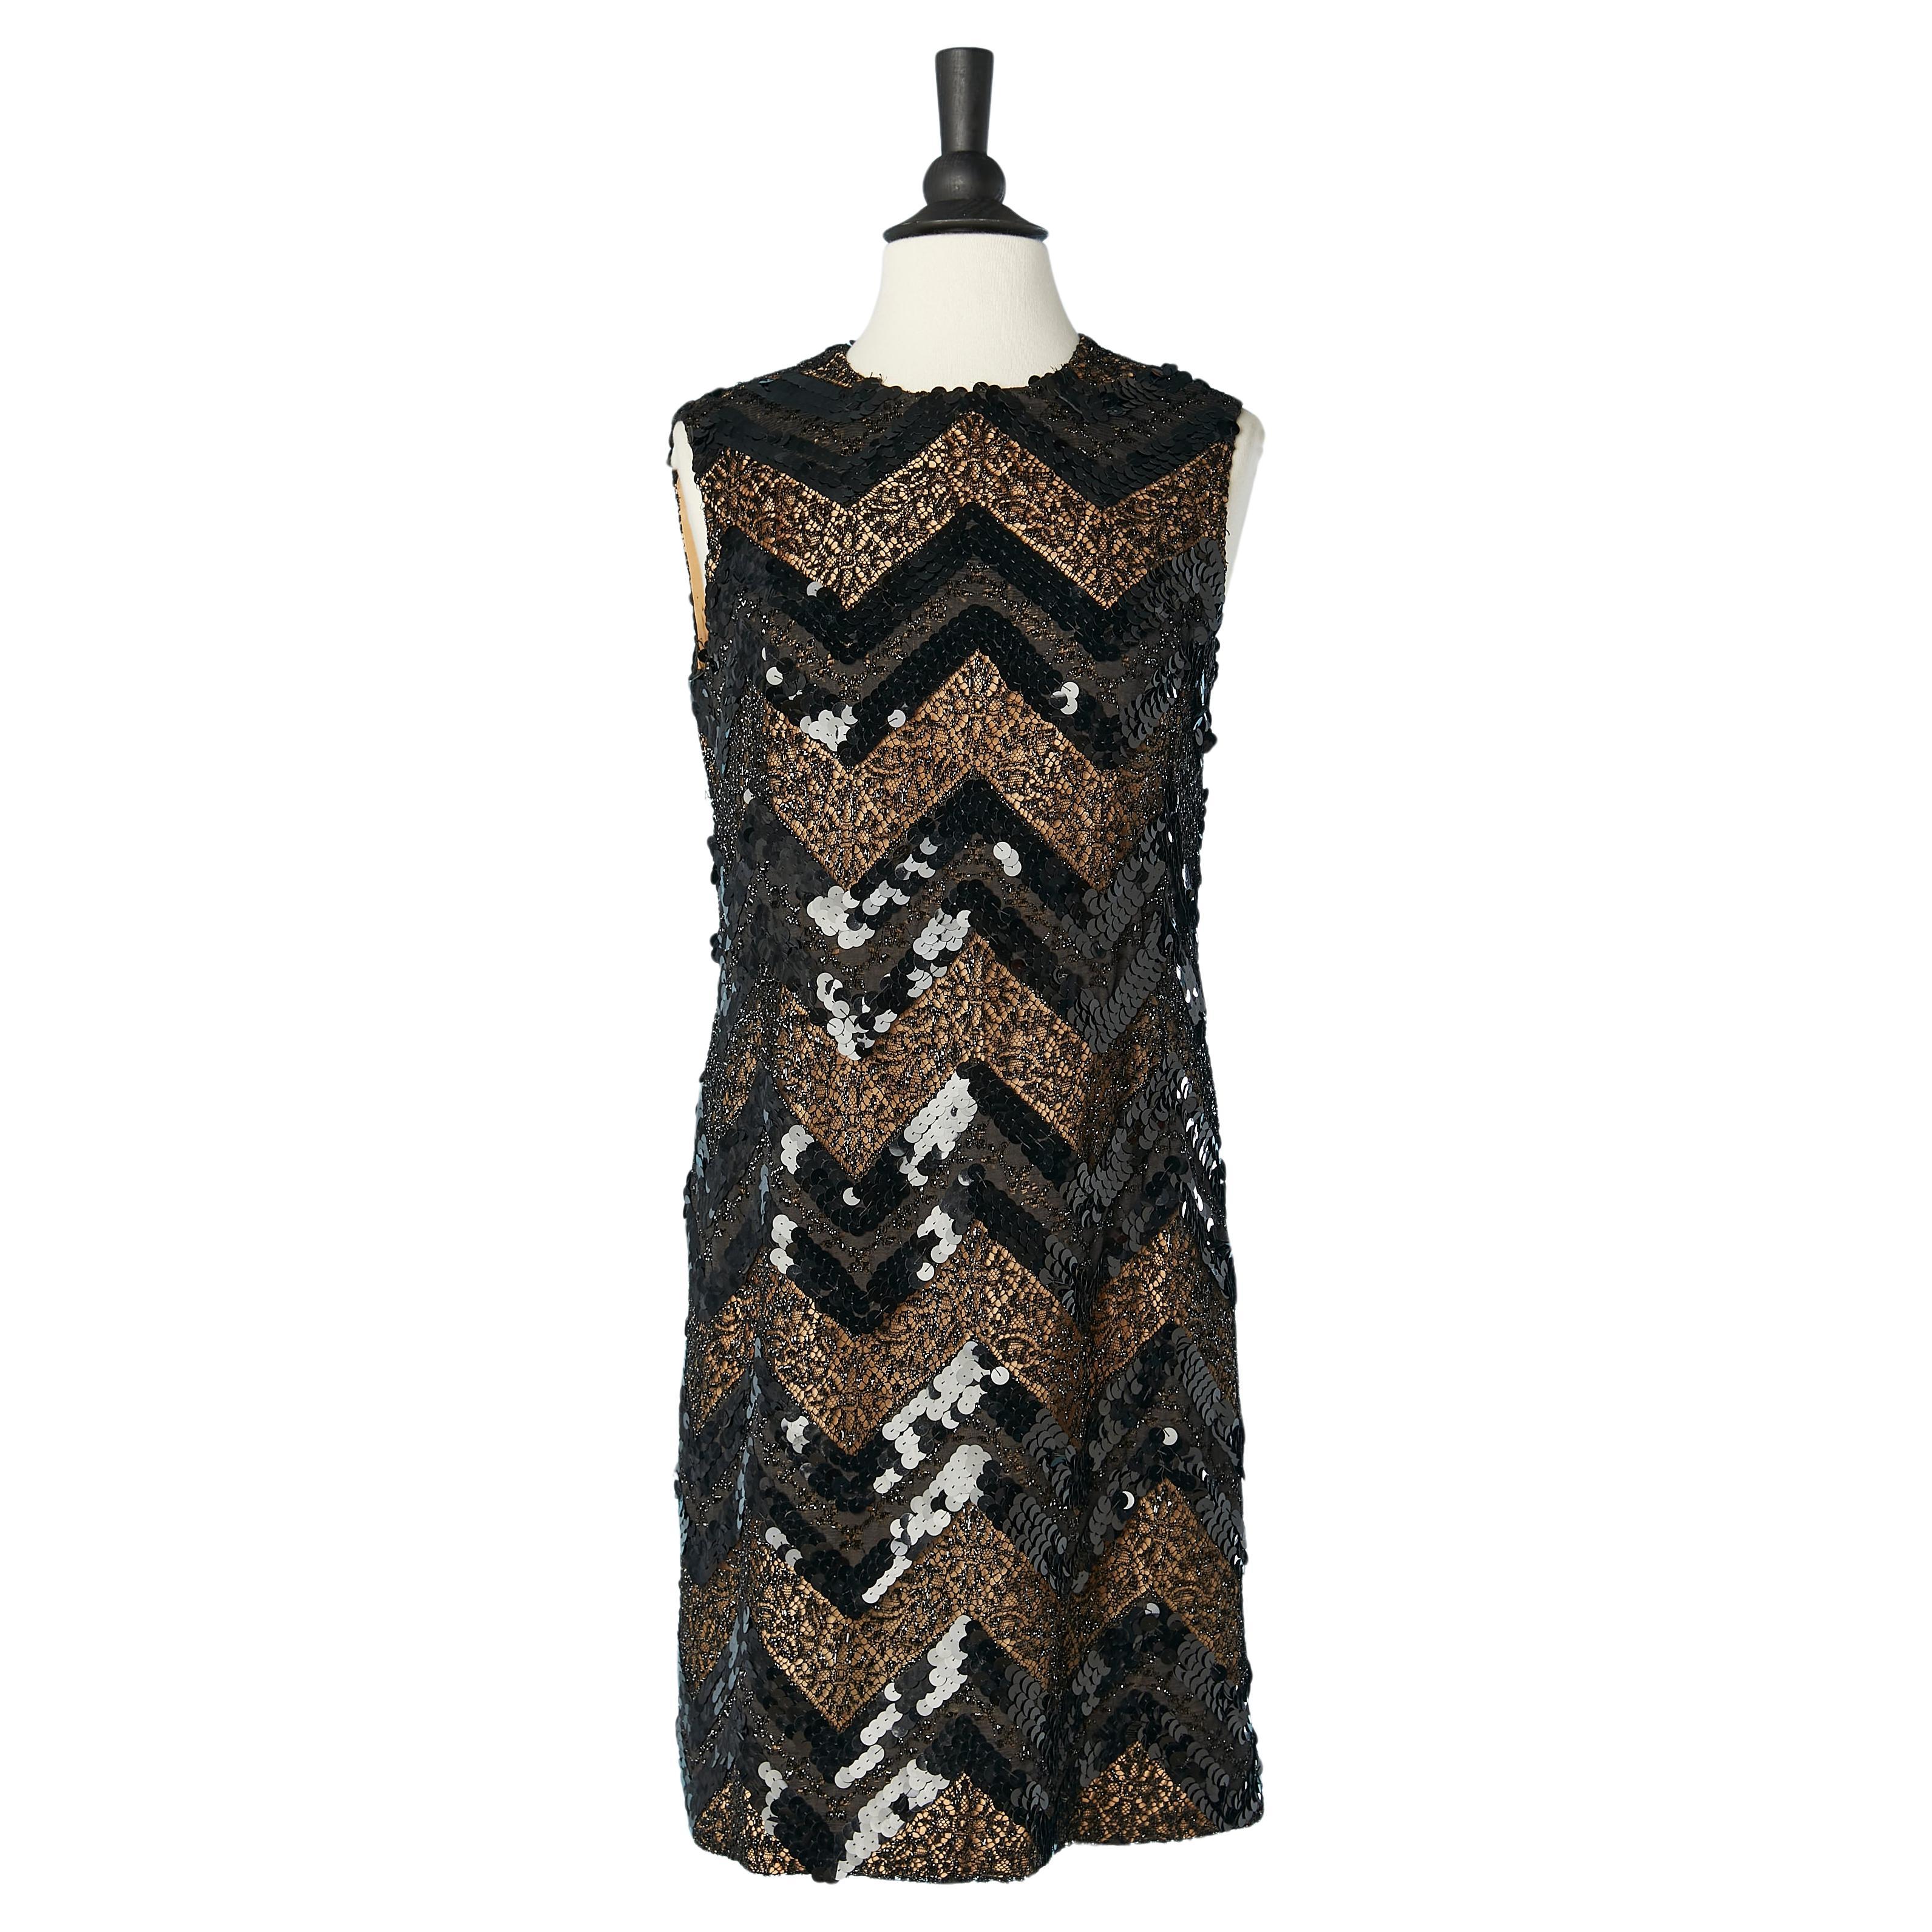 Black lace and sequin sleeveless cocktail dress Circa 1960's 